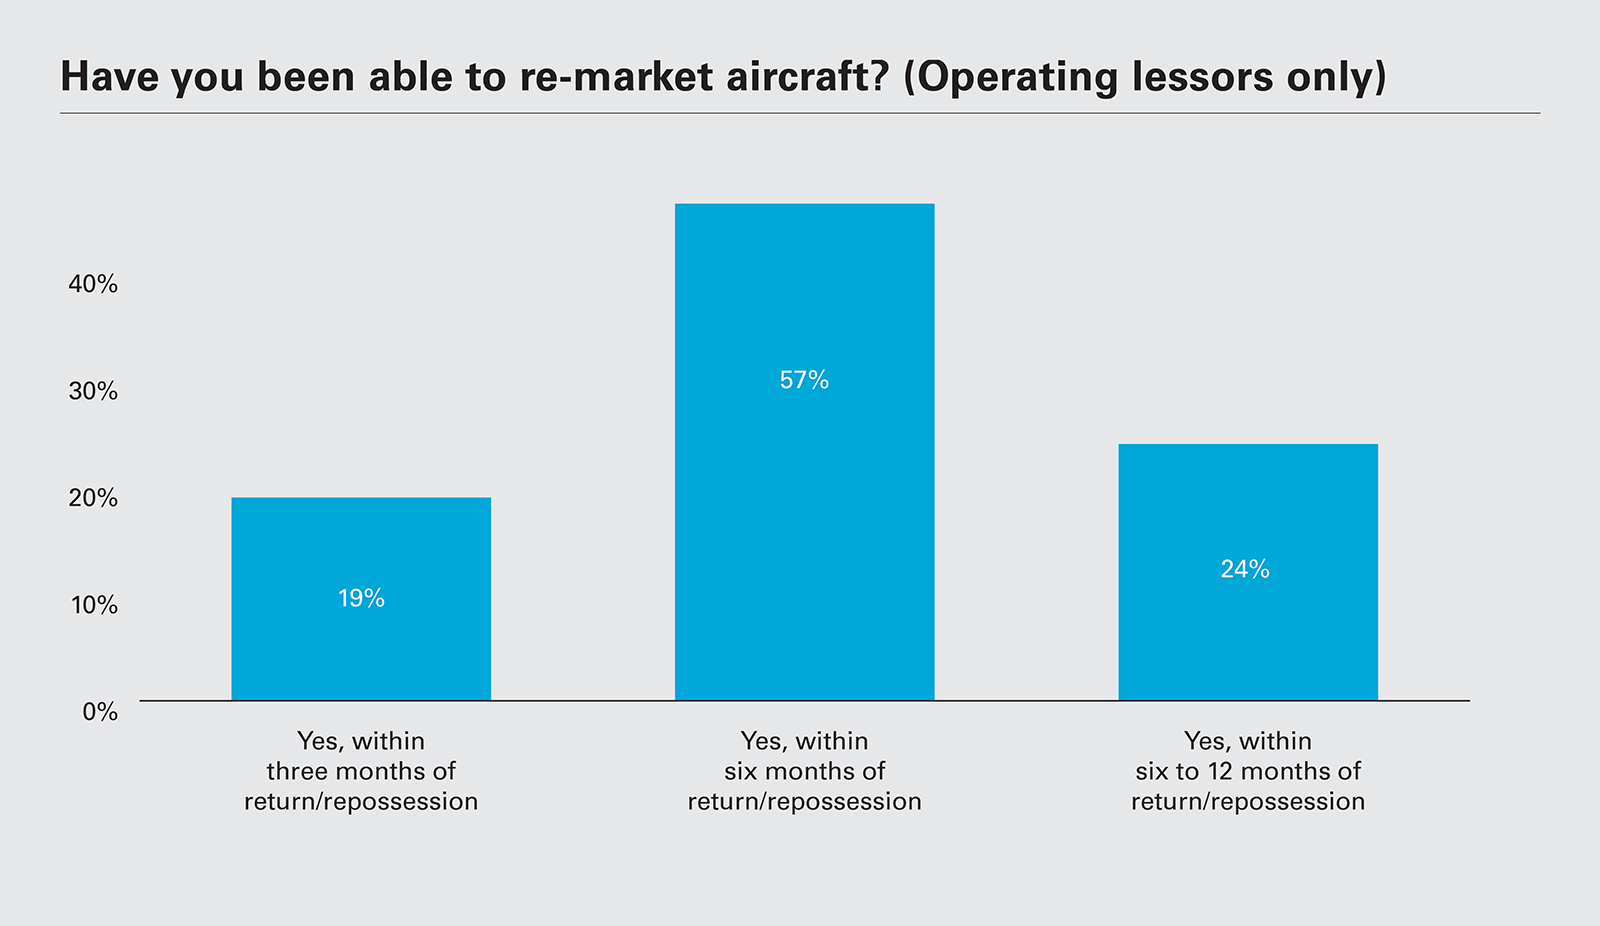 Have you been able to re-market aircraft? (Operating lessors only)